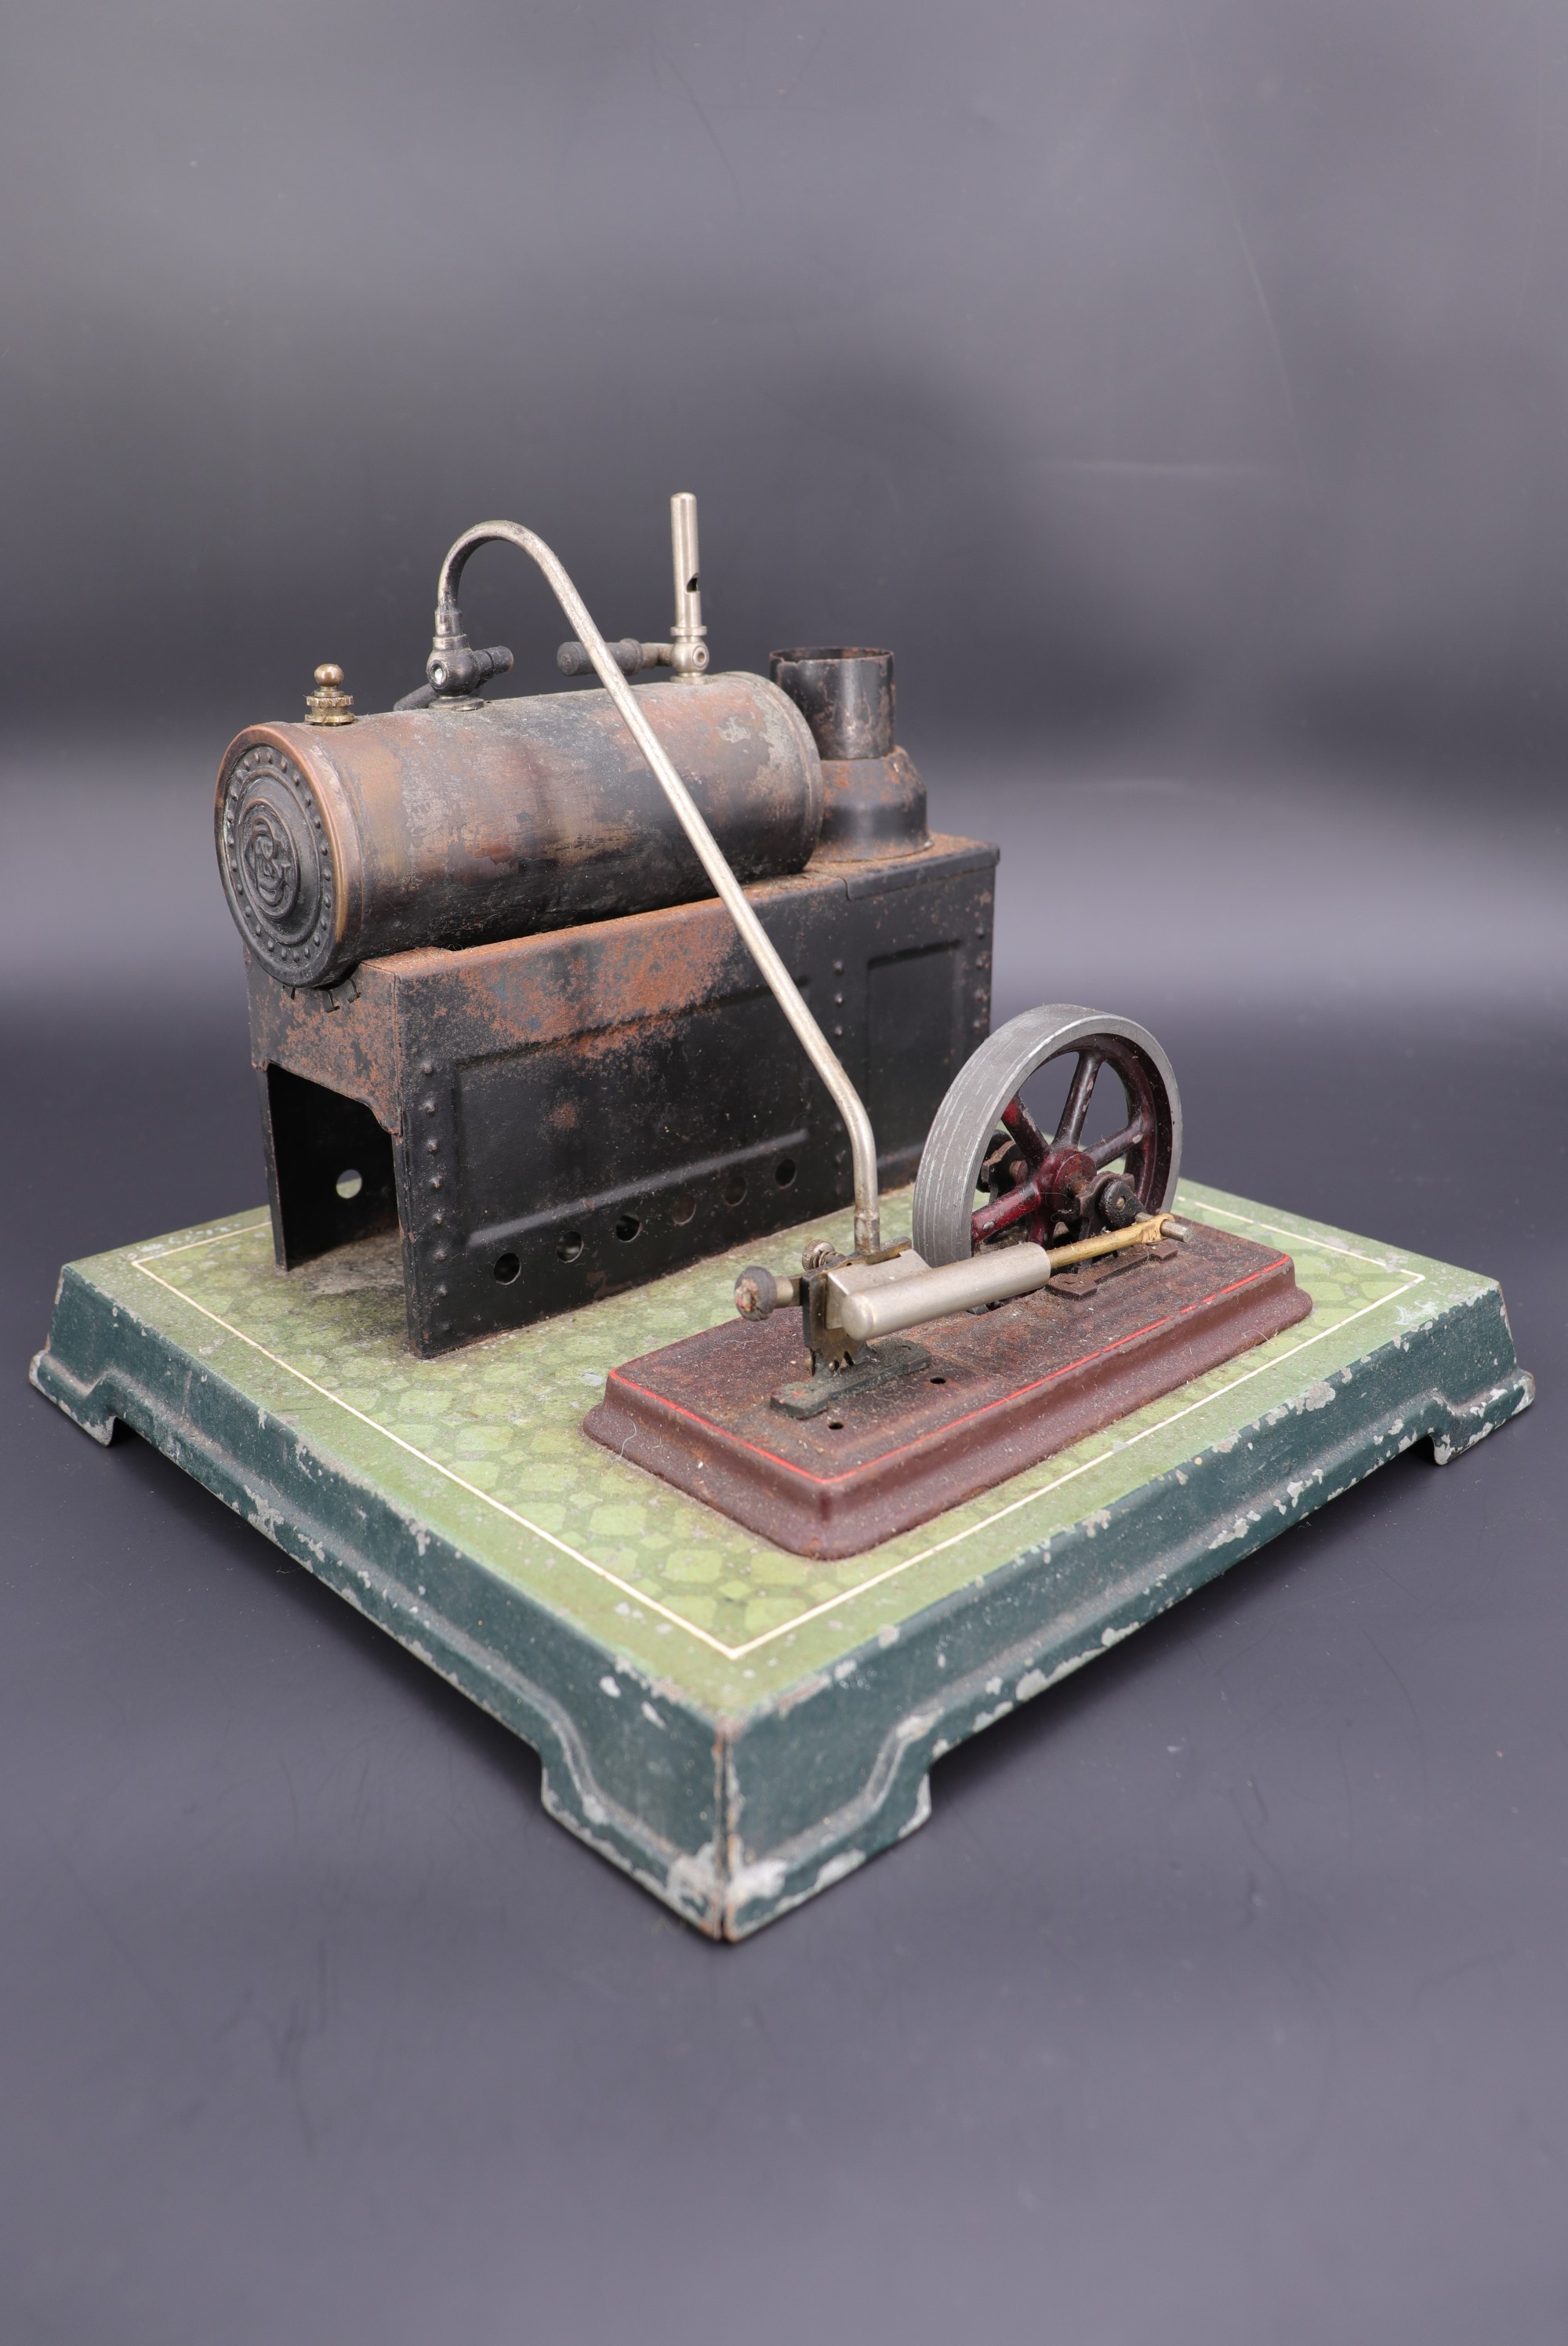 A Bing horizontal live steam engine with reverse function, 22 cm x 22 cm